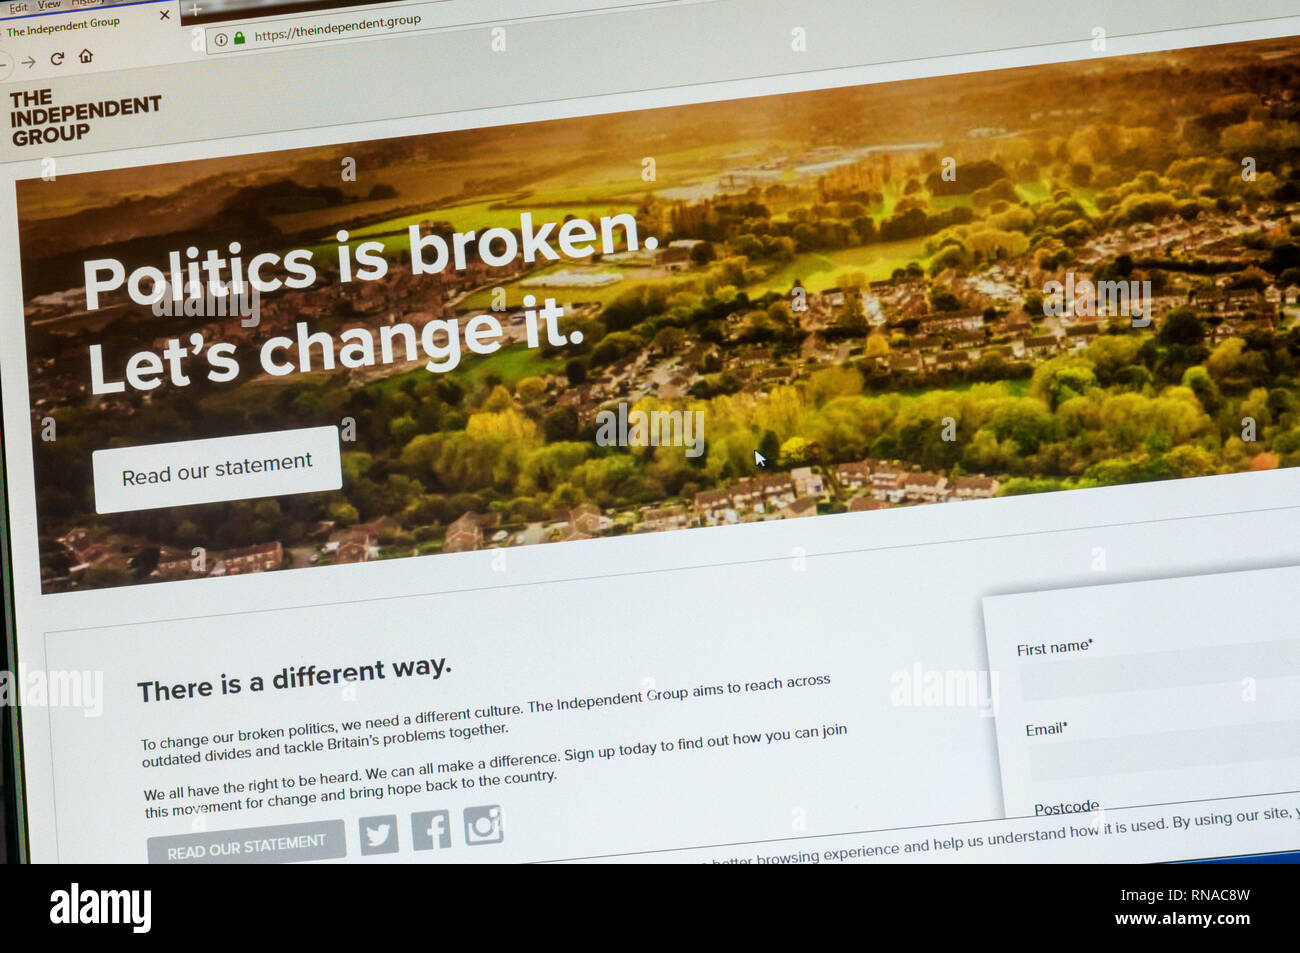 London, UK. 18th Feb, 2019. Seven MPs leave the Labour Party to form The Independent Group. Chuka Umunna, Luciana Berger, Gavin Shuker, Angela Smith, Chris Leslie, Mike Gapes & Ann Coffey have today resigned the Labour Party whip to form The Independent Group. Shown is the web site of the new grouping. Credit: sjscreens/Alamy Live News Stock Photo